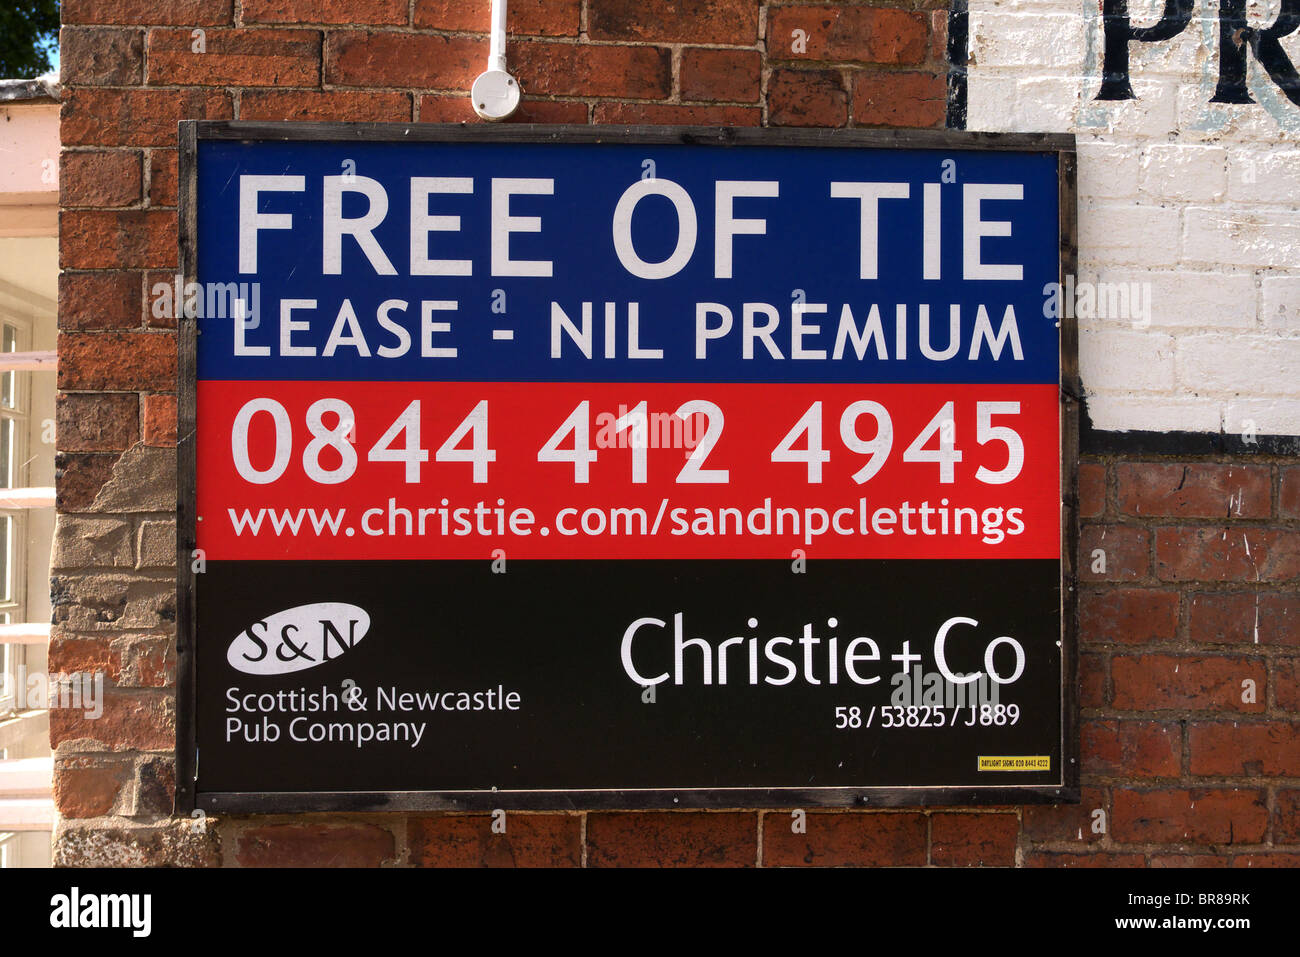 Commercial To Let Sign for a Public House fixed to a Wall, UK Stock Photo